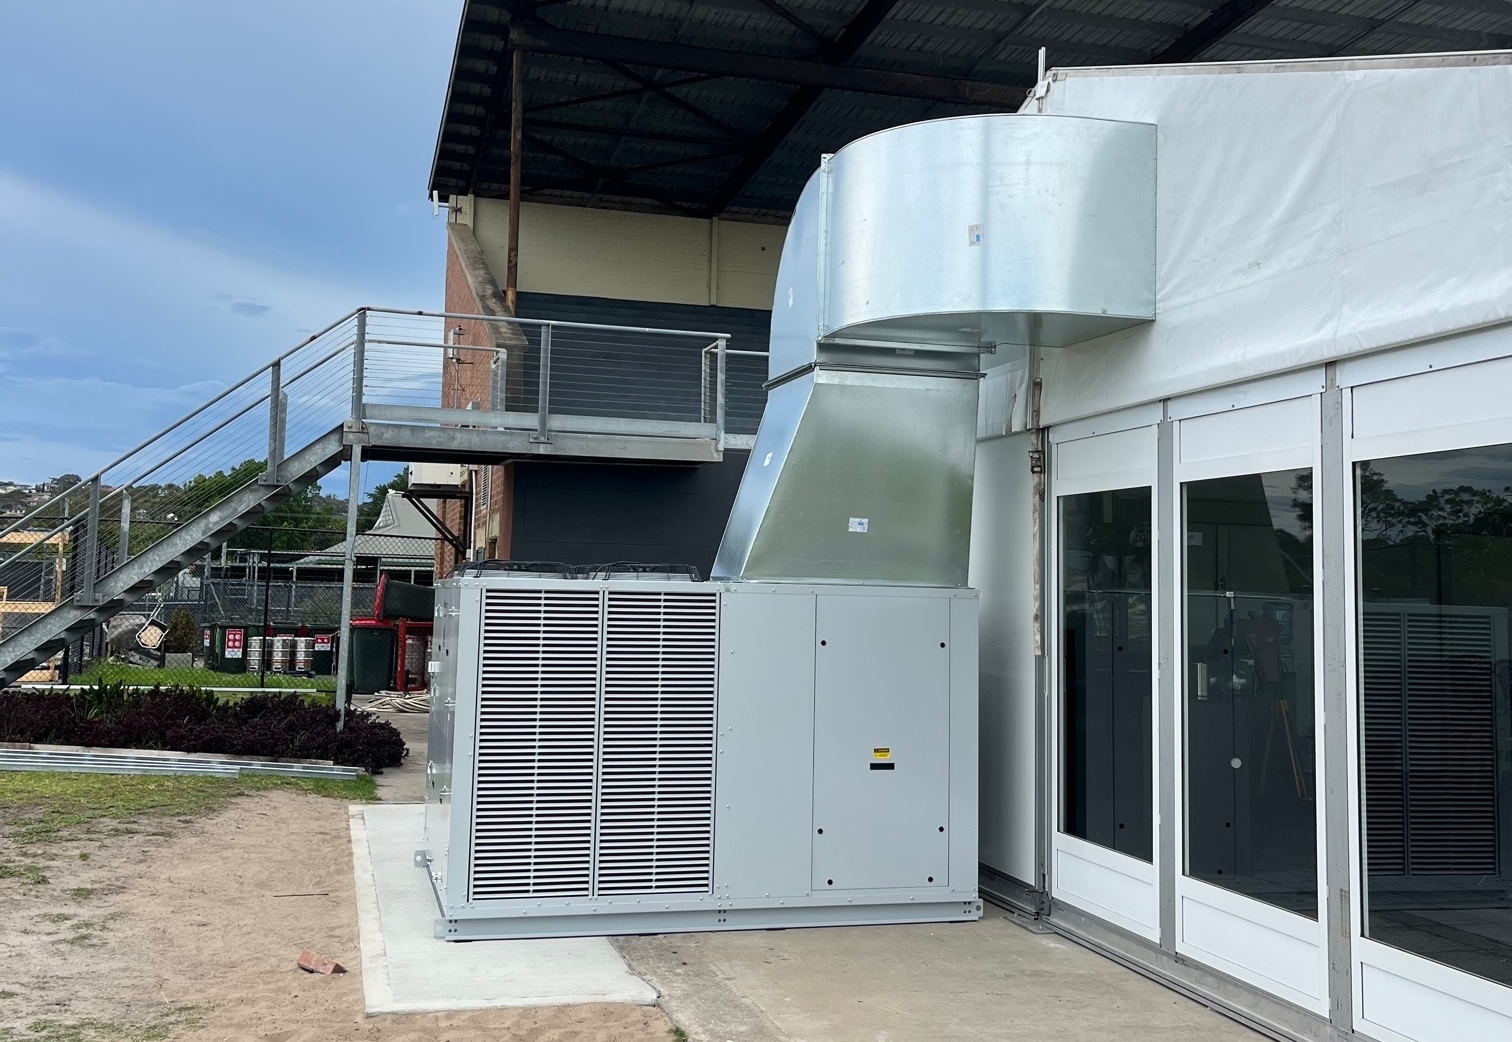 Air Conditioning at Newcastle Races image